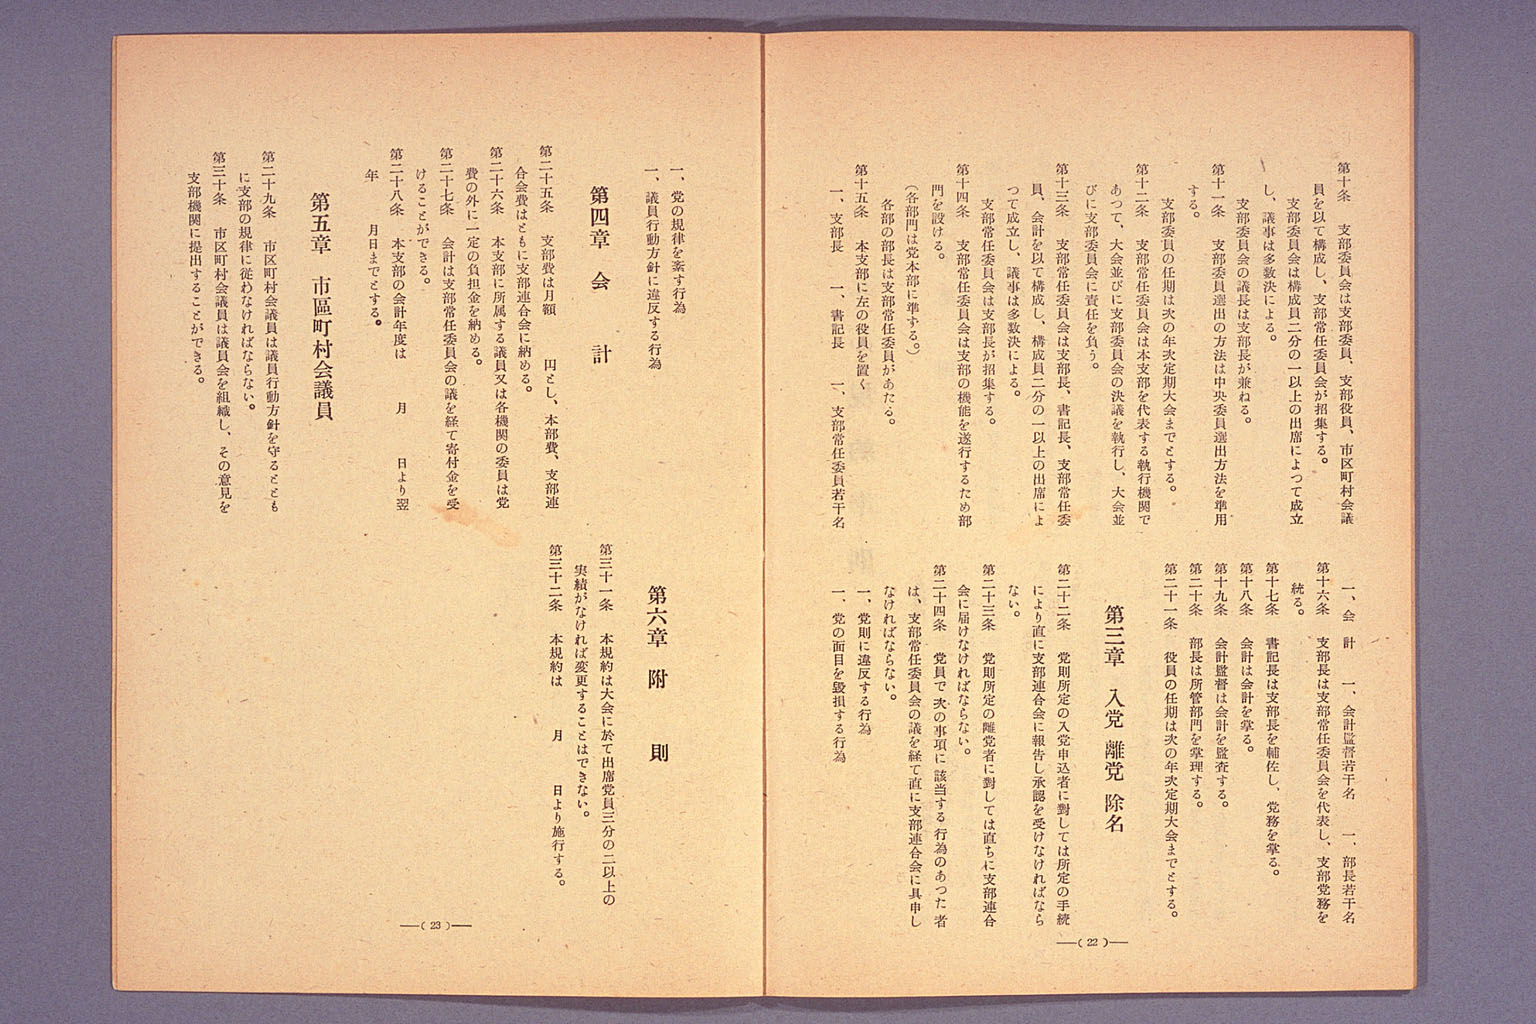 Platform of Japan Reform Party, declaration, release of policy guidelines, and others (larger)